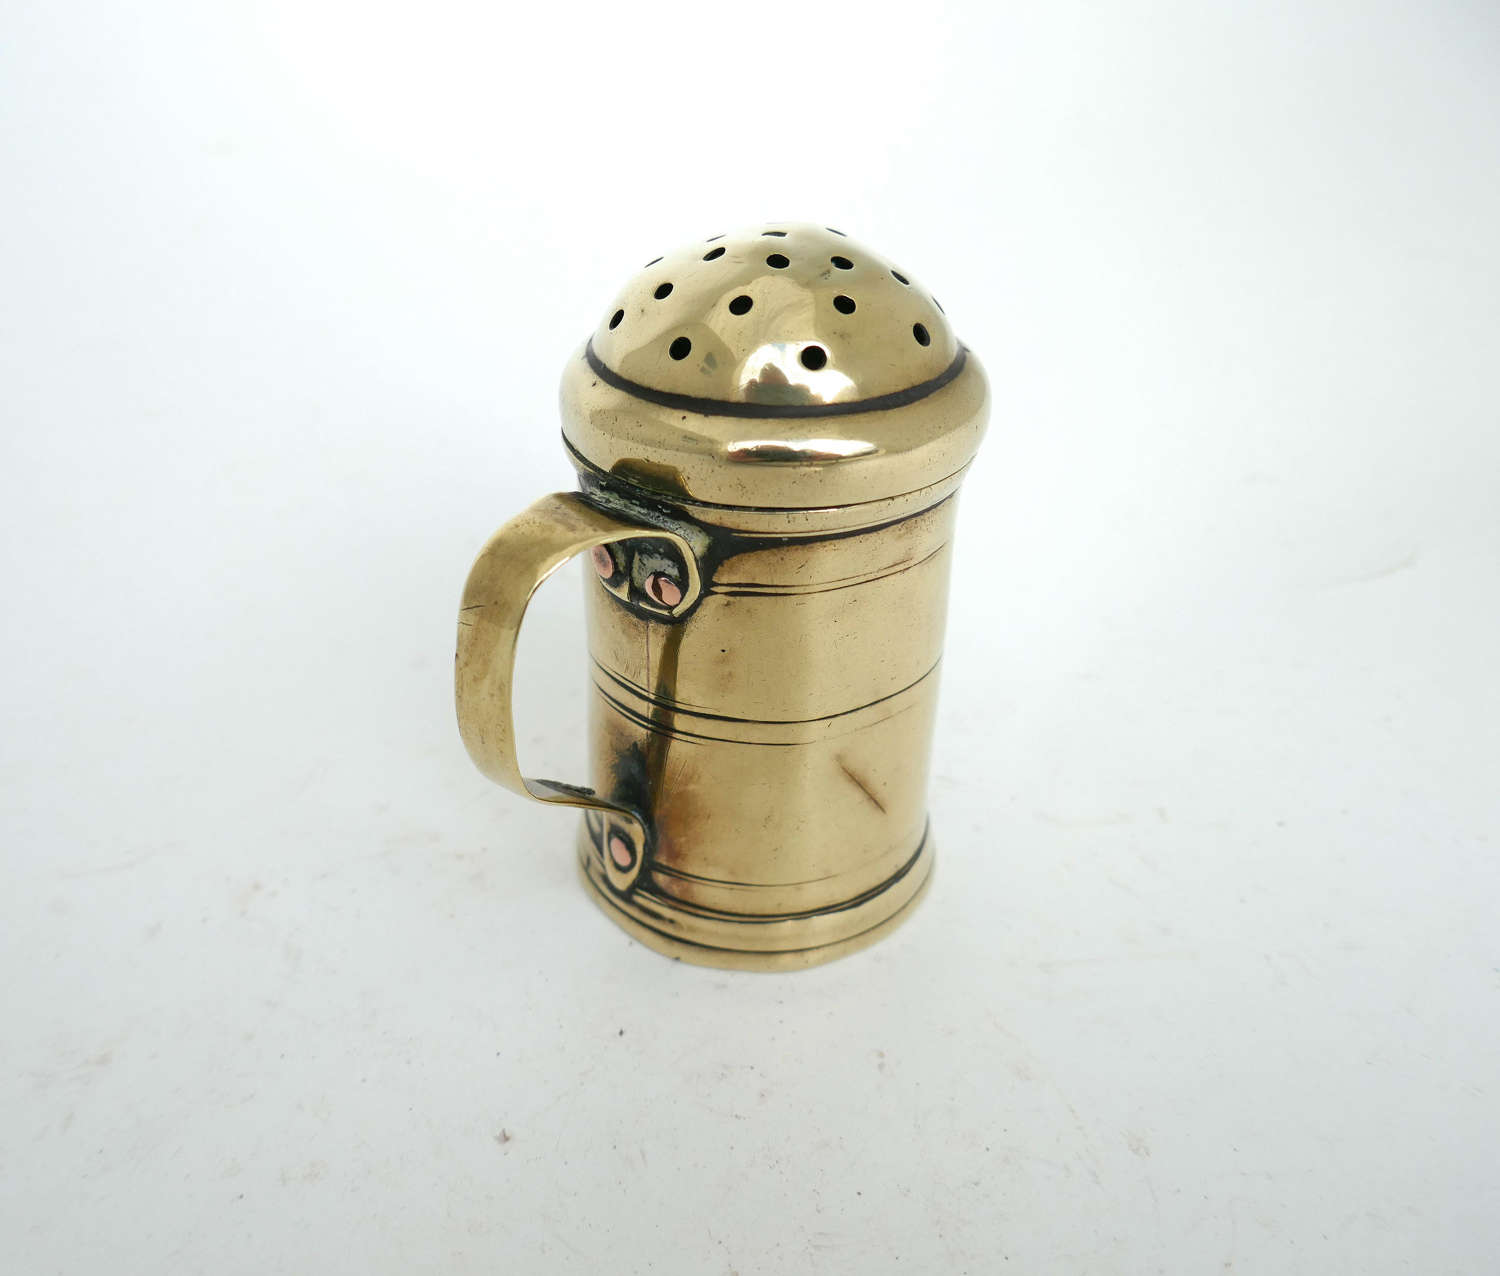 Early Antique Metalware 18thc Small Brass Dredger / Spice Pot. English